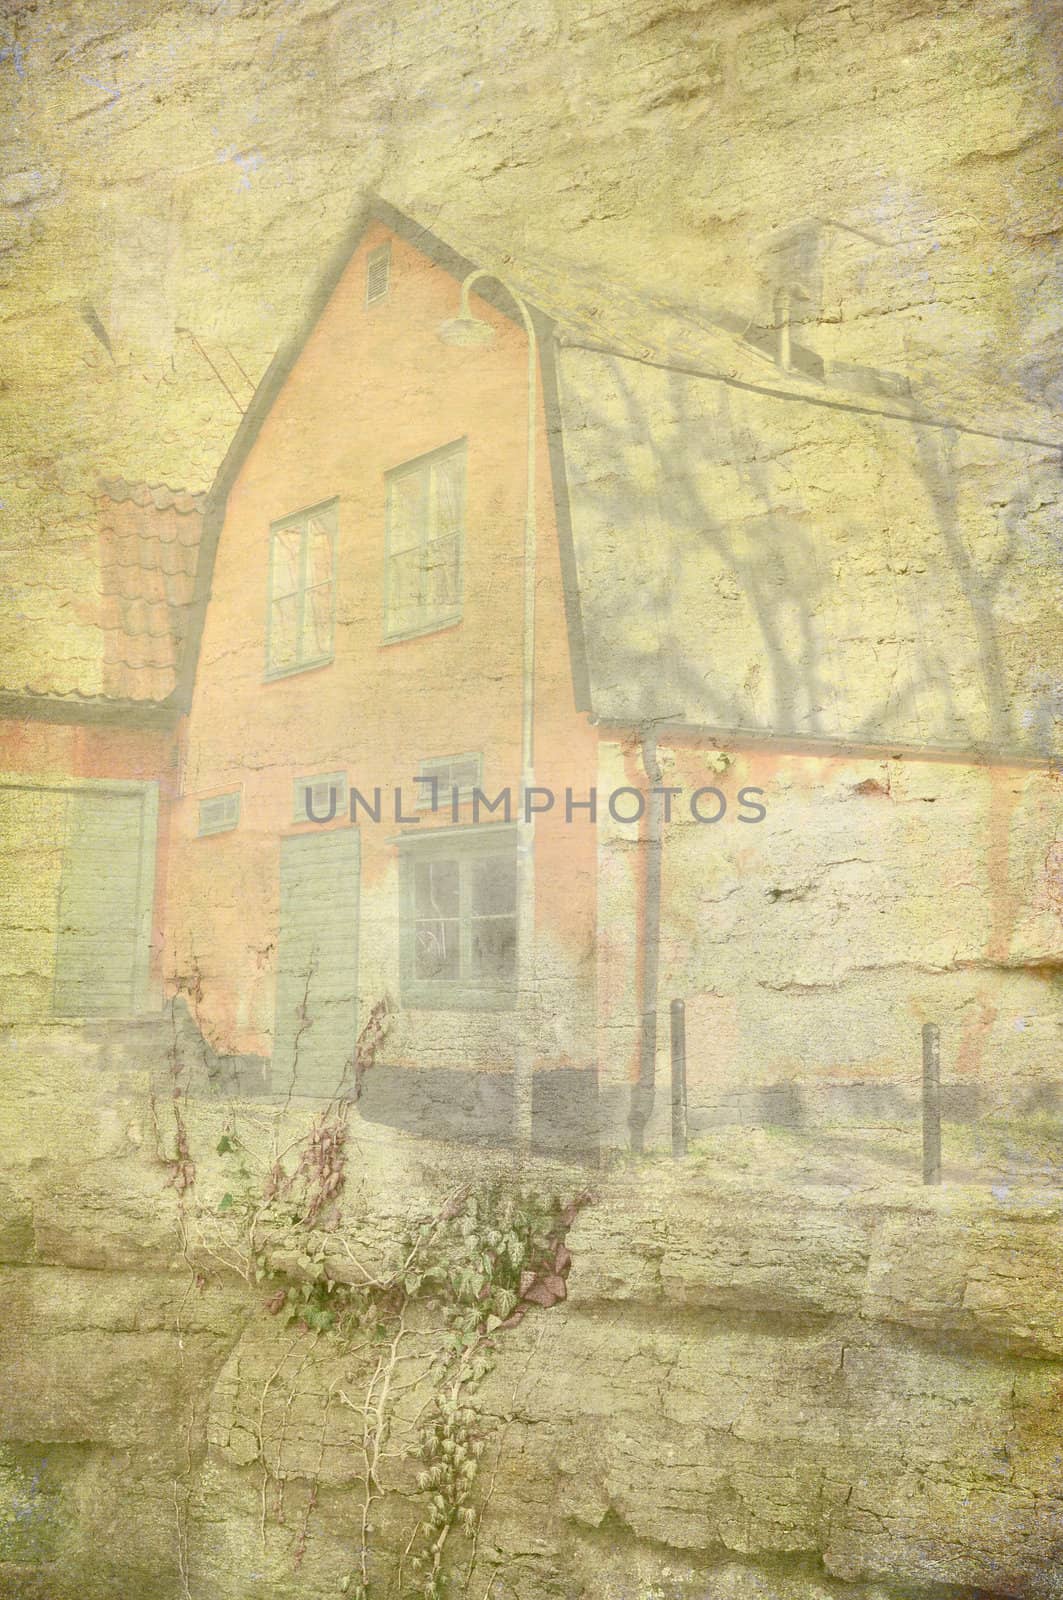 Textured background of an old house in grunge.